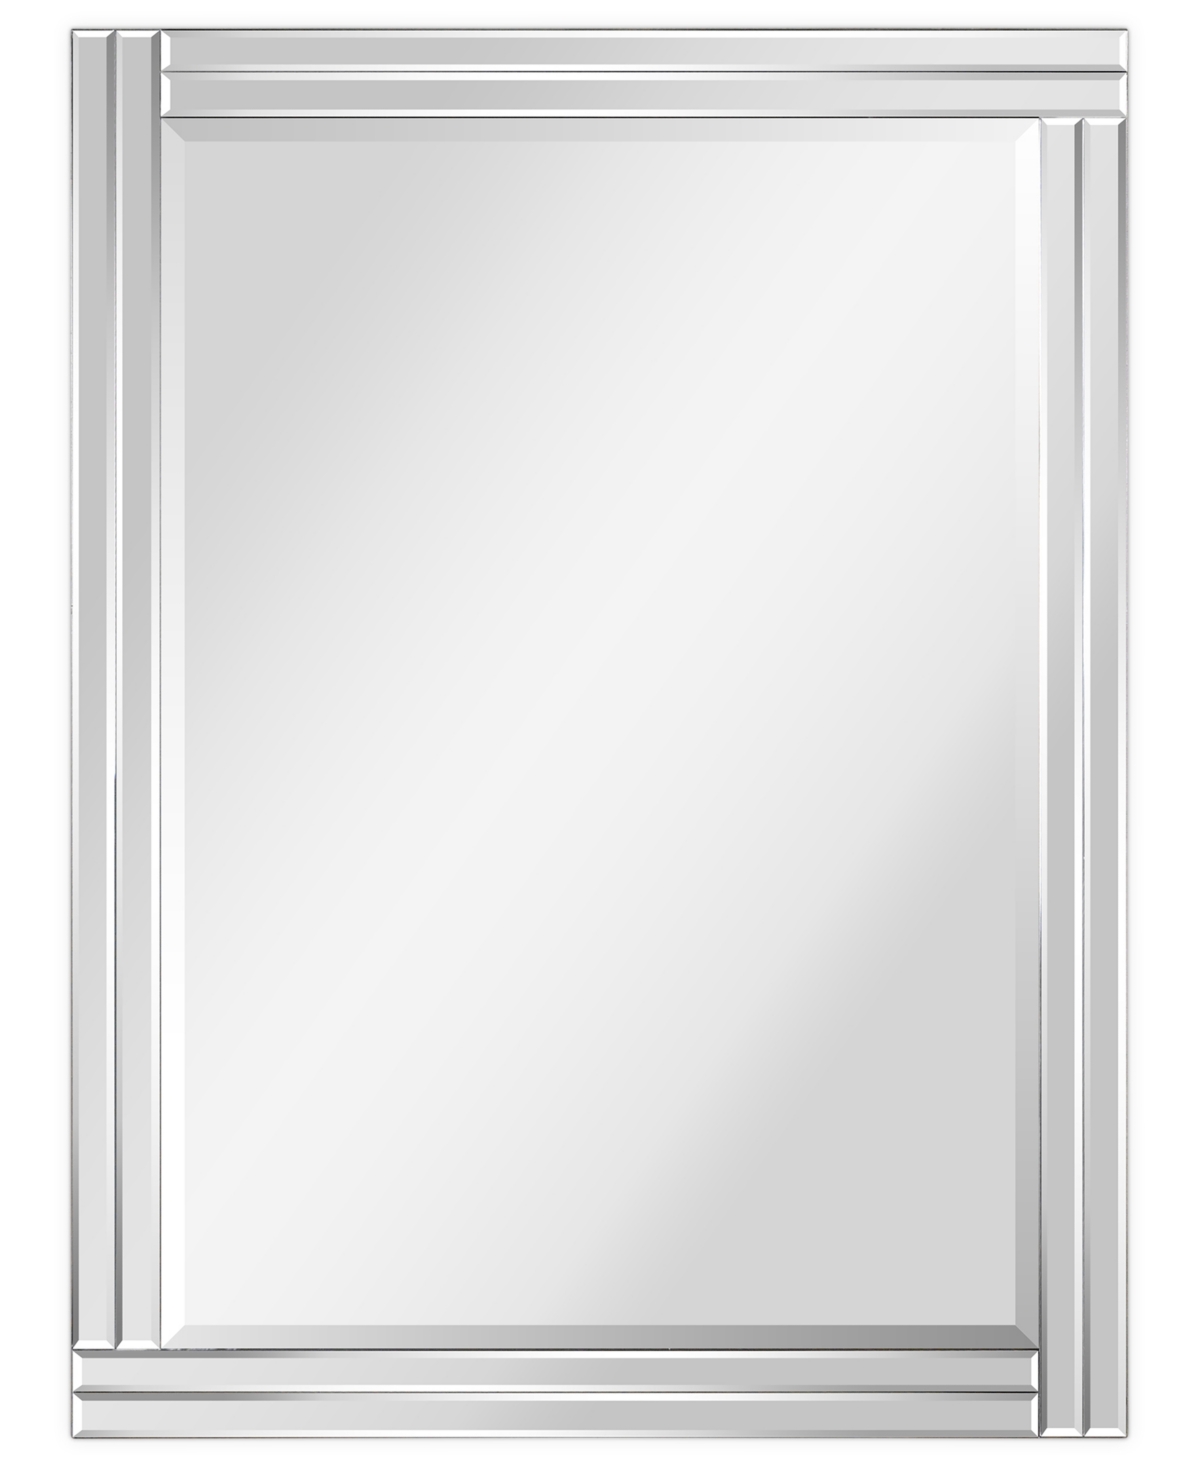 Moderno Stepped Beveled Rectangle Wall Mirror, 40" x 30" x 1.18" - Clear